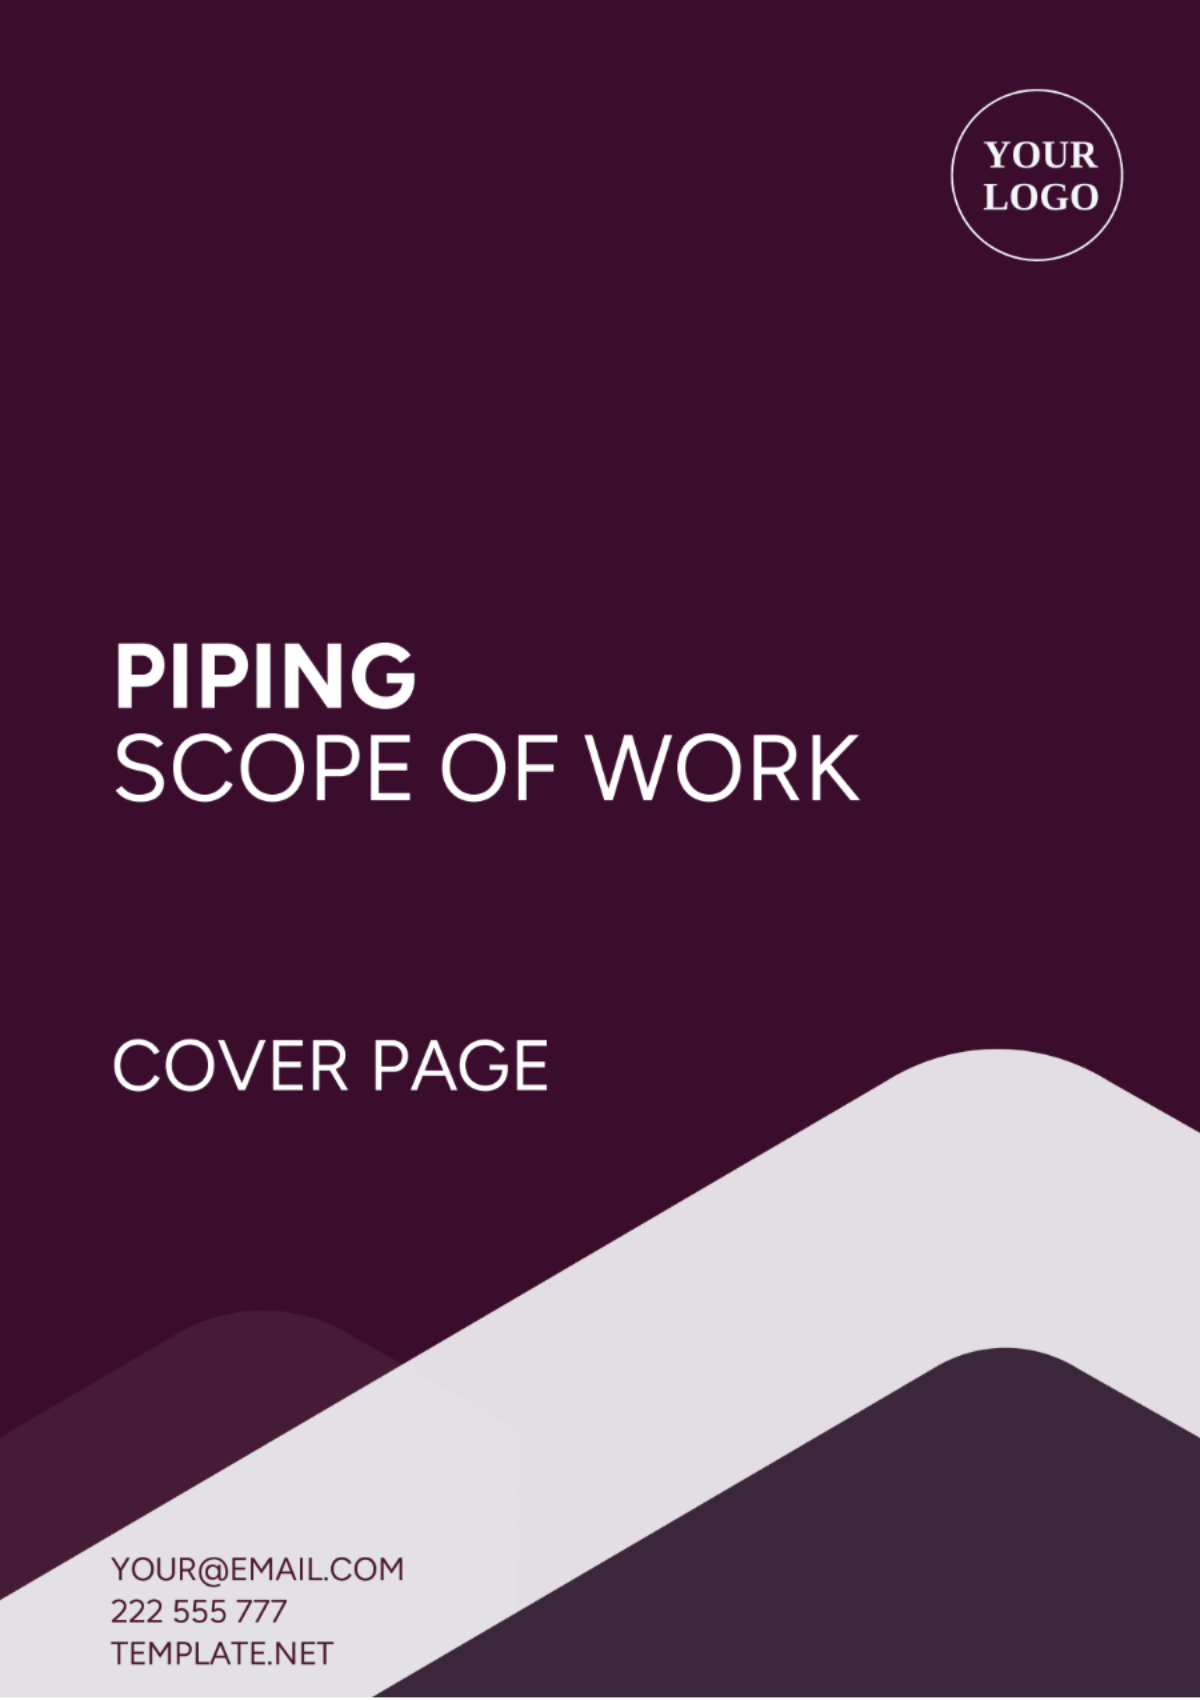 Free Piping Scope Of Work Template